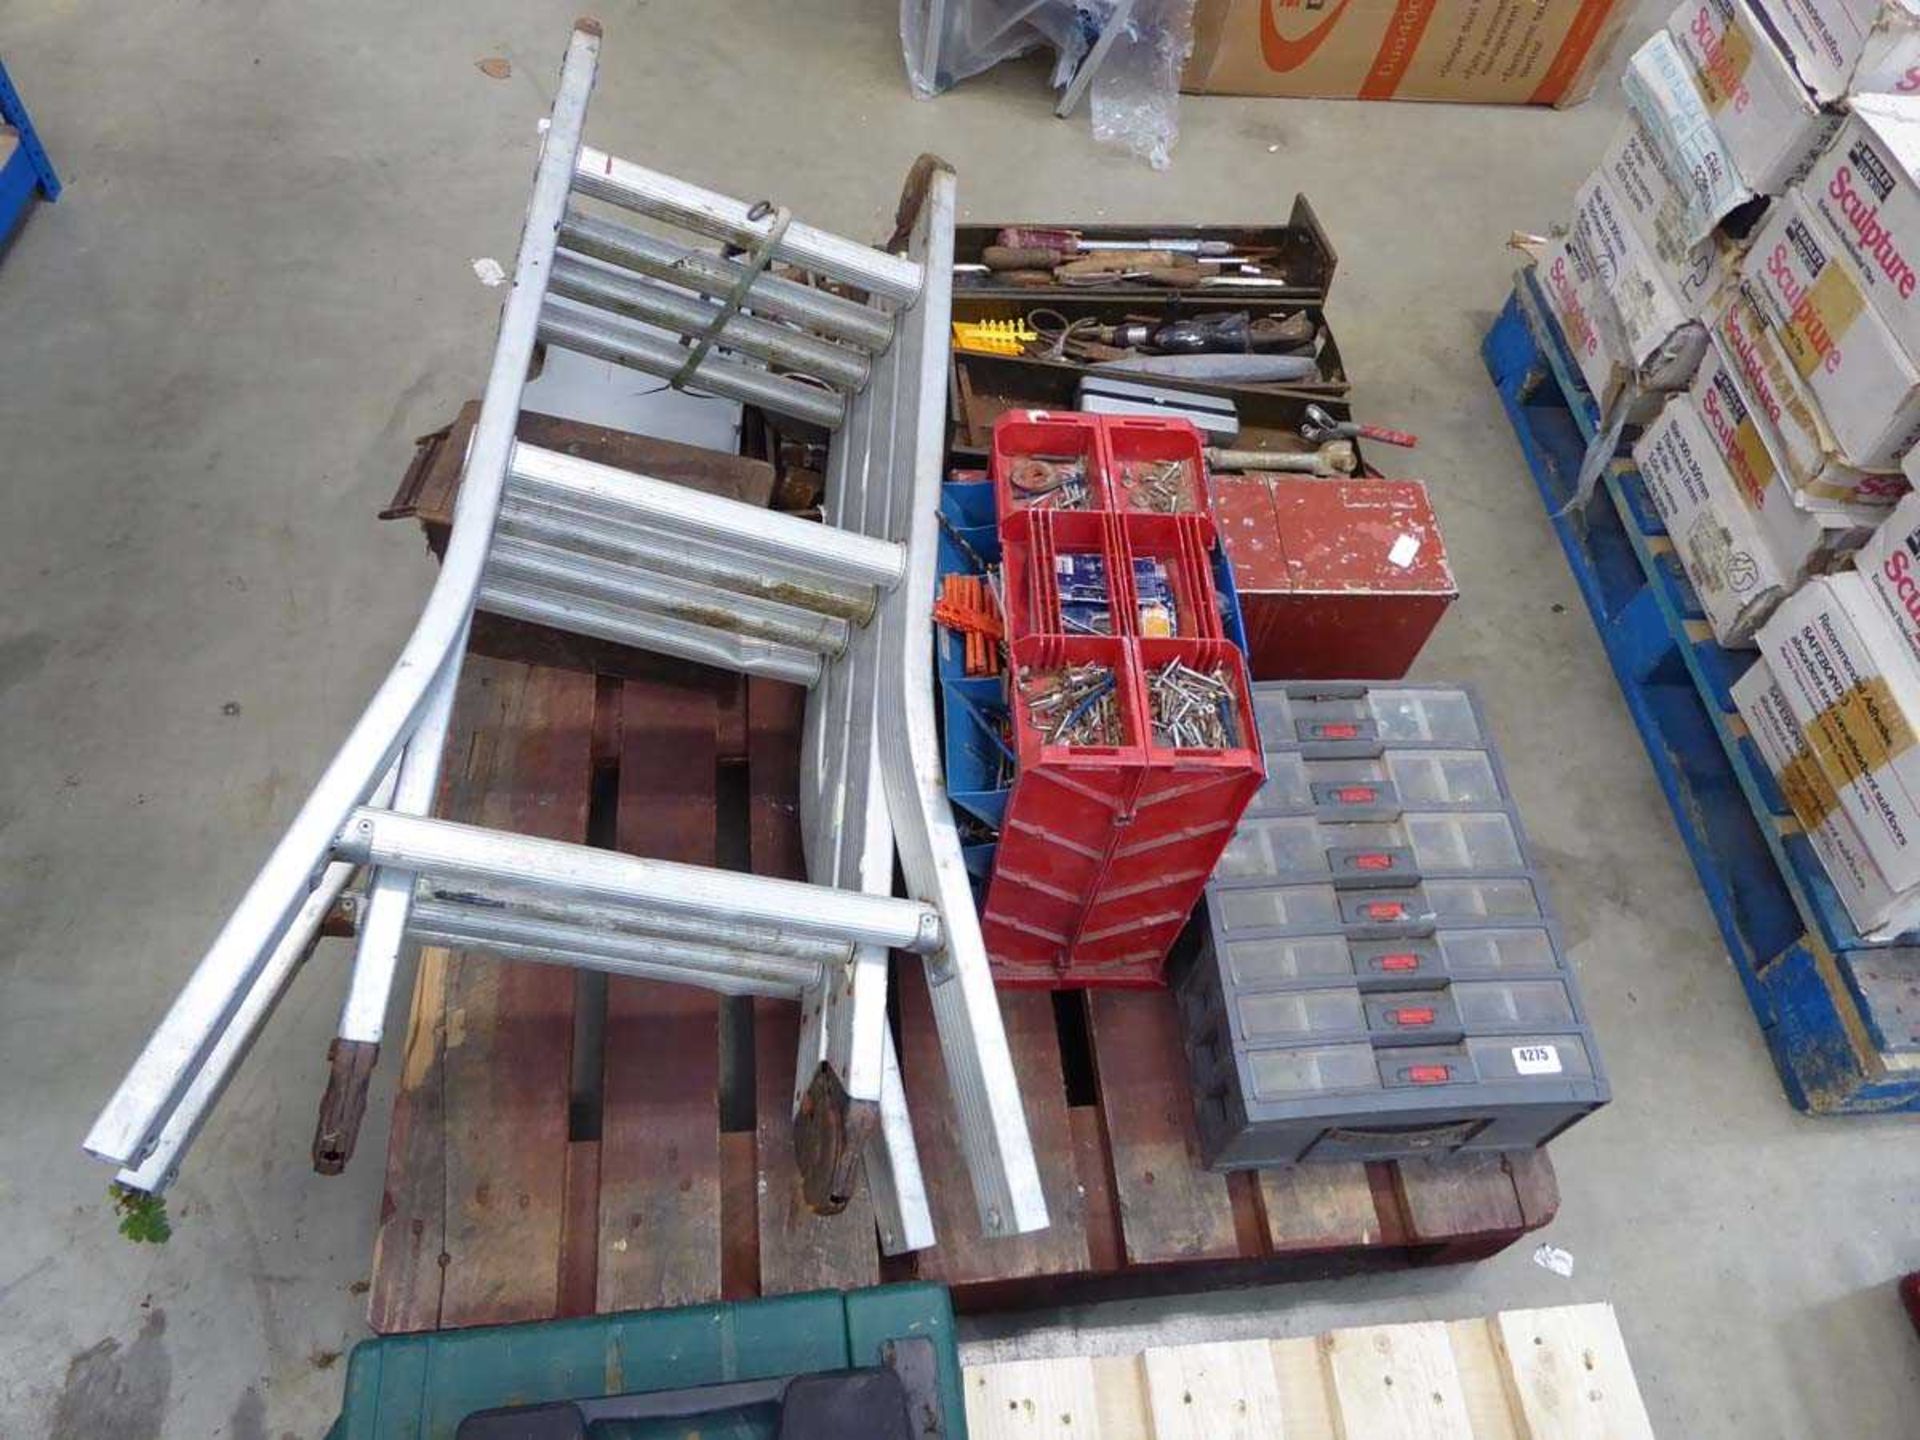 Pallet containing screw boxes, tools, toolbox, fold out ladder etc